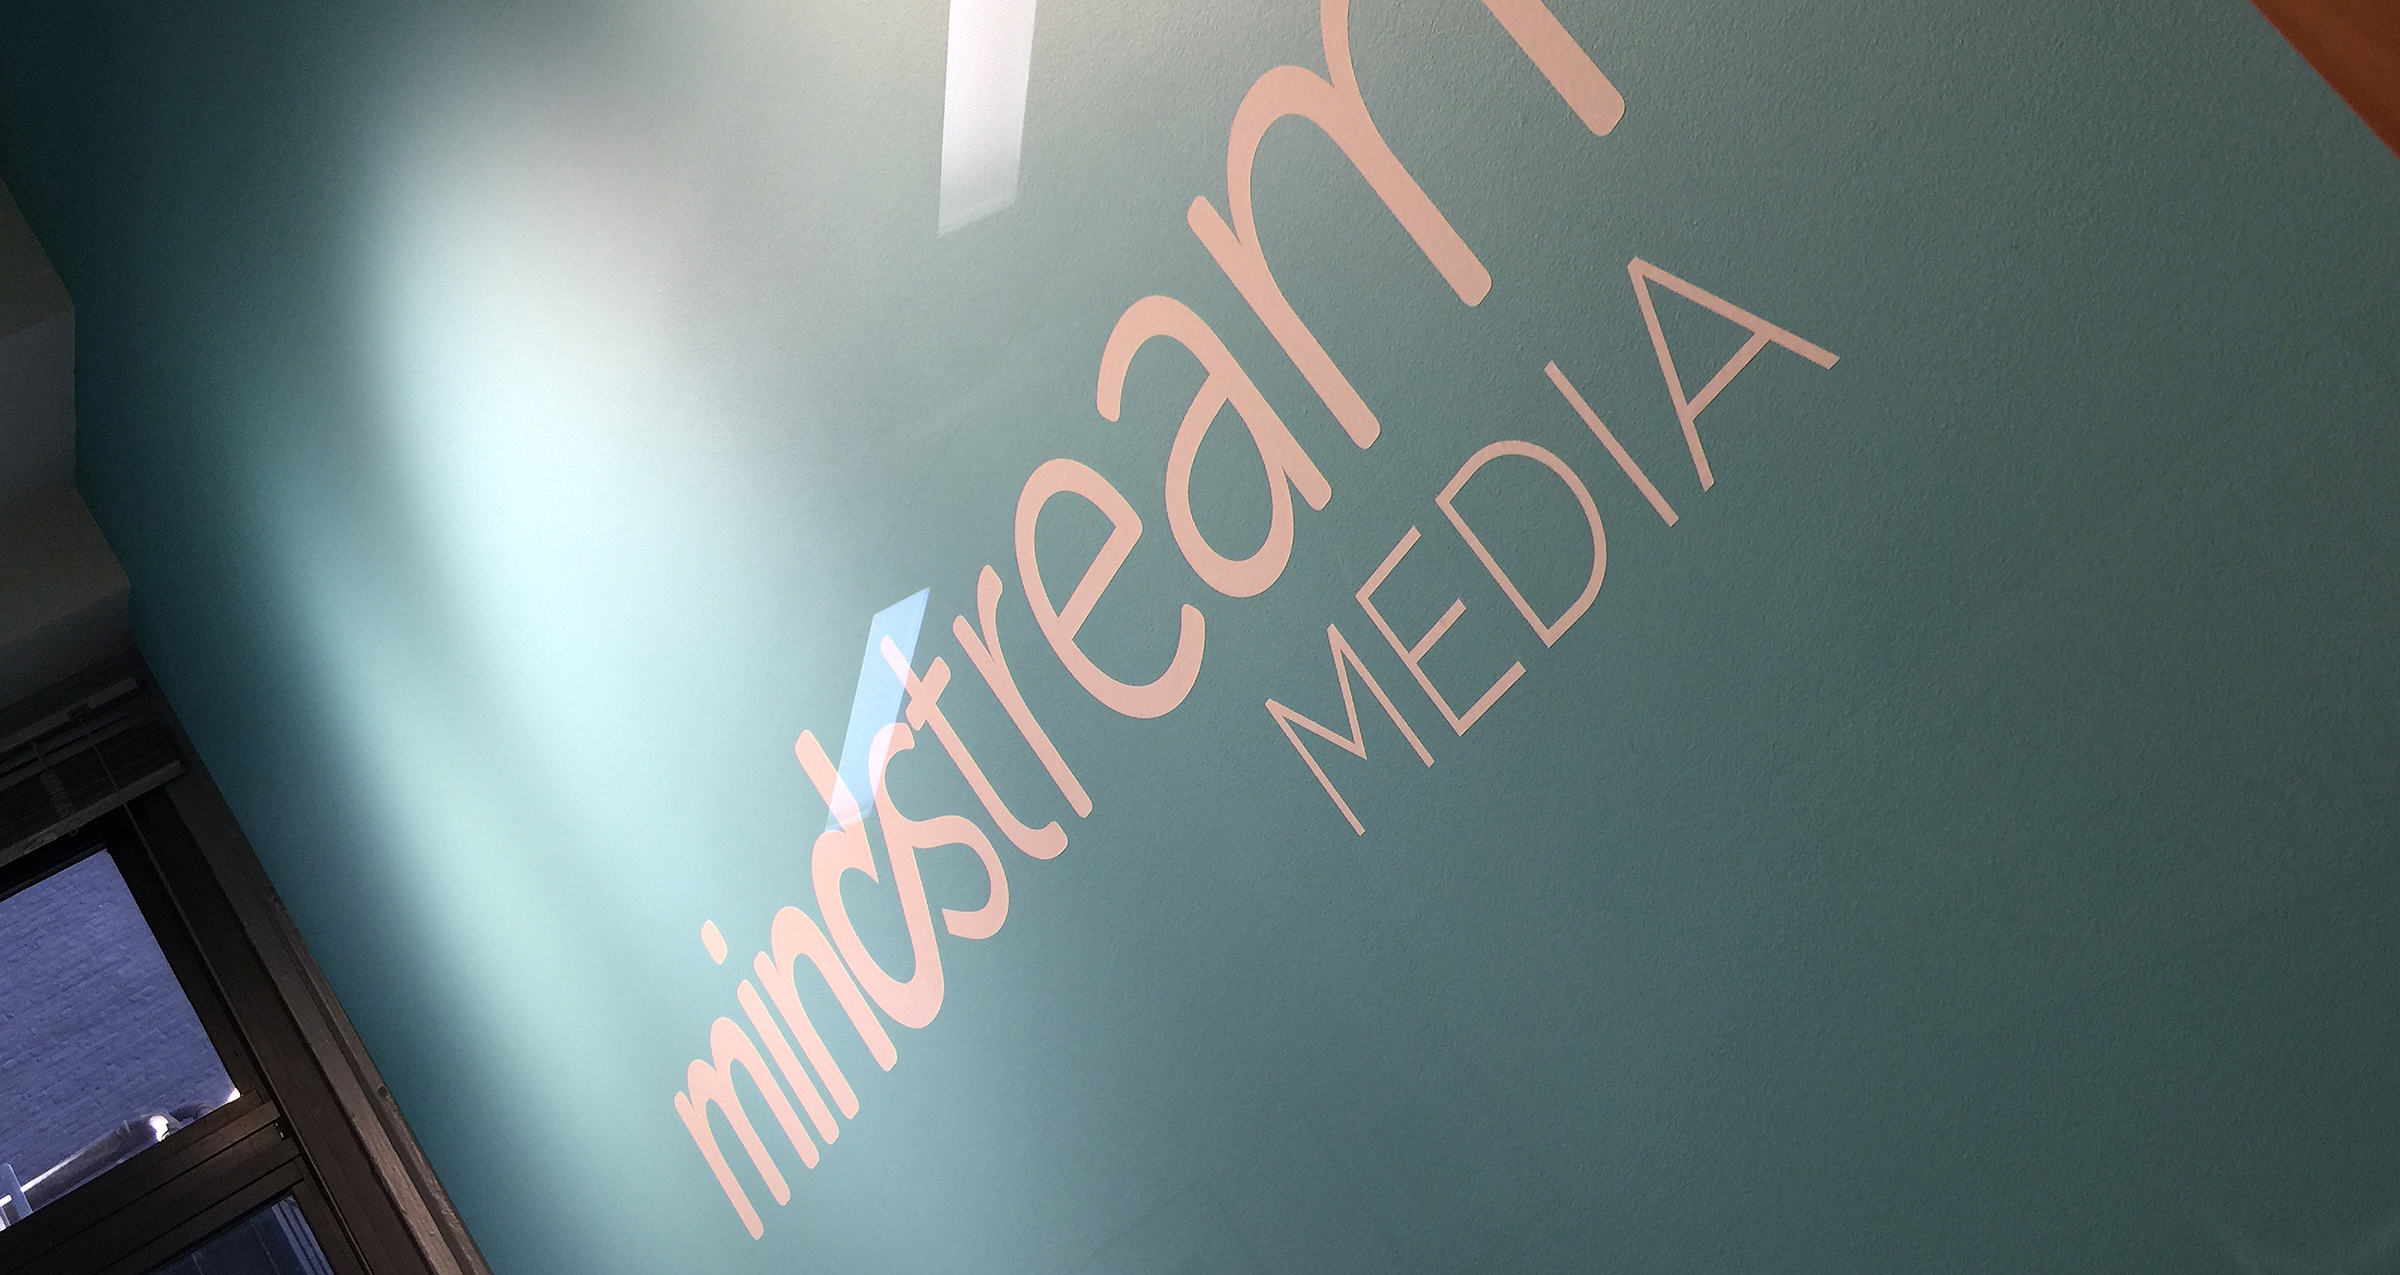 EdgeCore Merges with Mindstream Media Through Eastport Holdings’ Acquisition